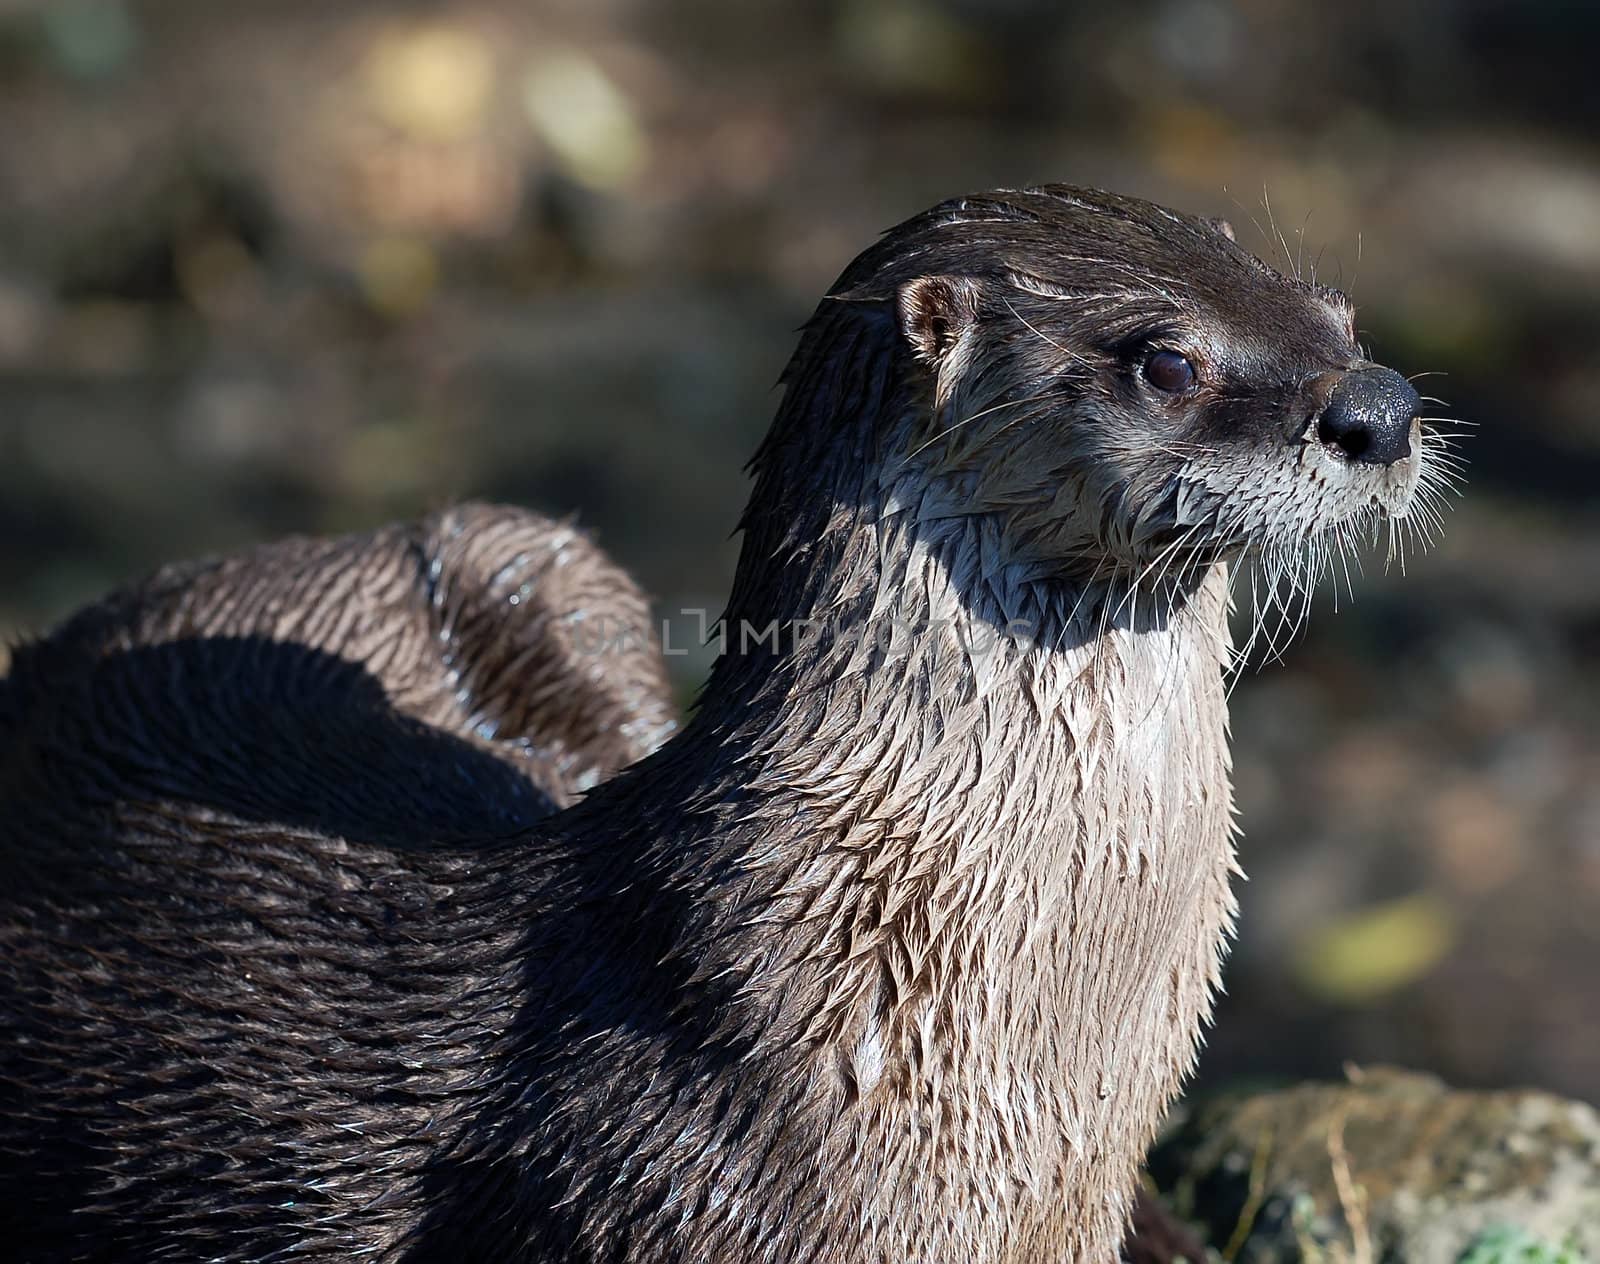 Northern River Otter (Lontra canadensis) by nialat